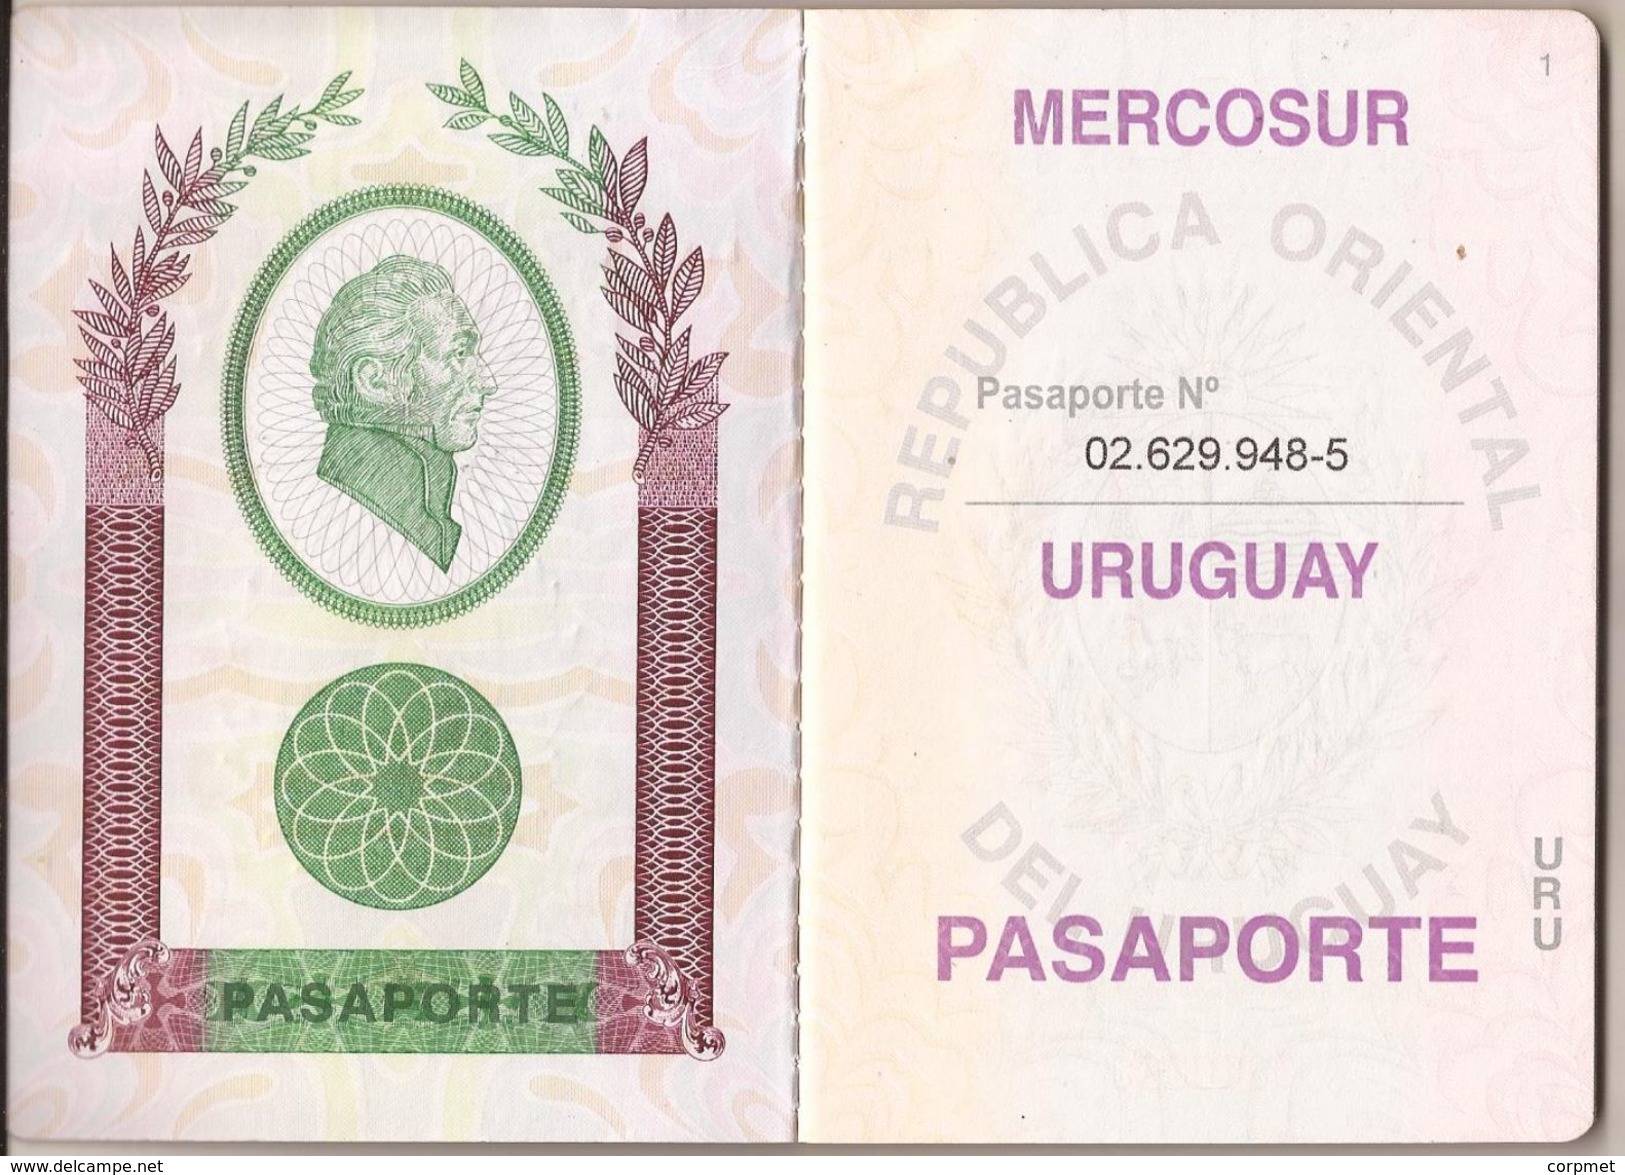 URUGUAY  - BIOMETRIC 1st VERSION - MERCOSUR   PASSPORT - PASSEPORT - Pictured COAT OF ARMS- SOUTH AMERICA MAP And COW - Historical Documents